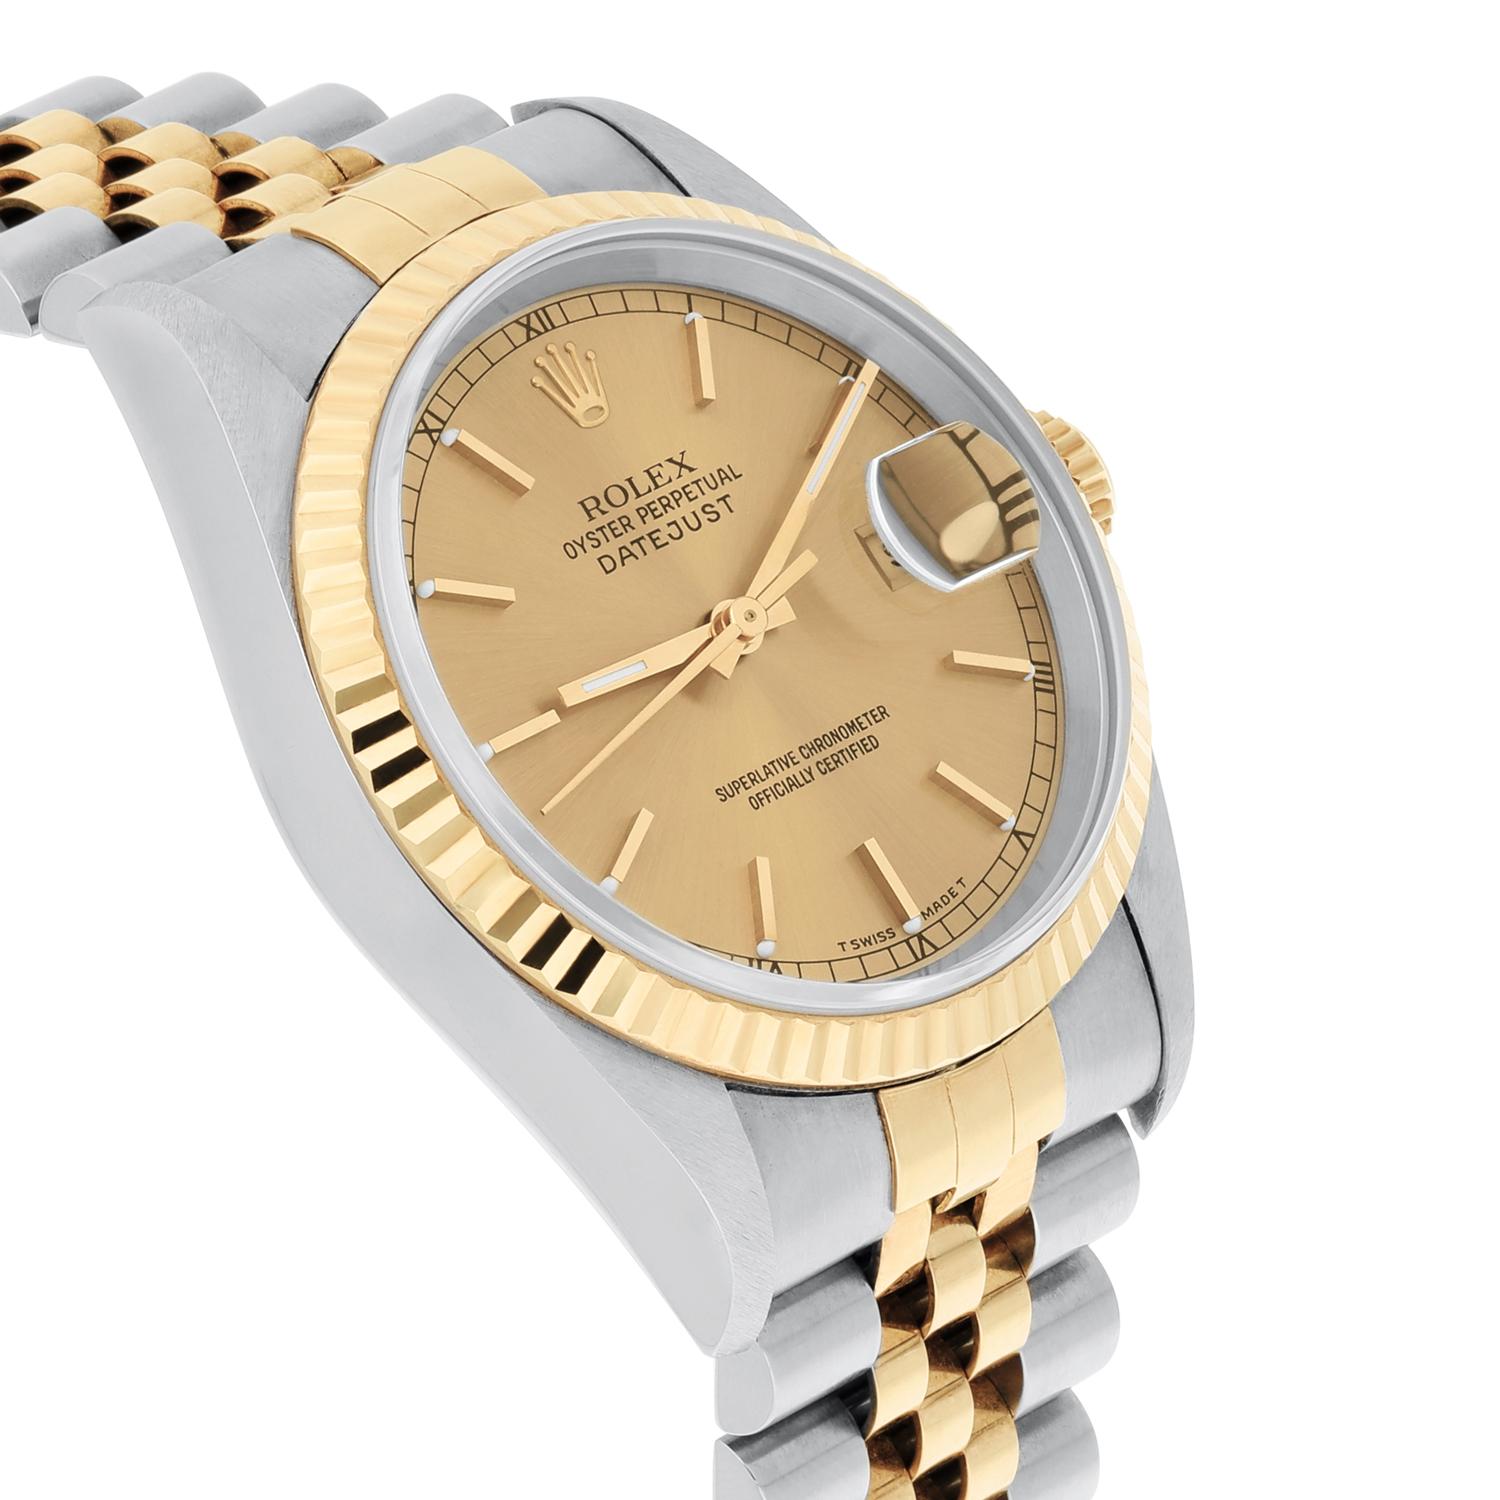 Rolex Datejust 36 Two Tone Champagne Dial Jubilee Band 16233 Circa 1995 For Sale 1